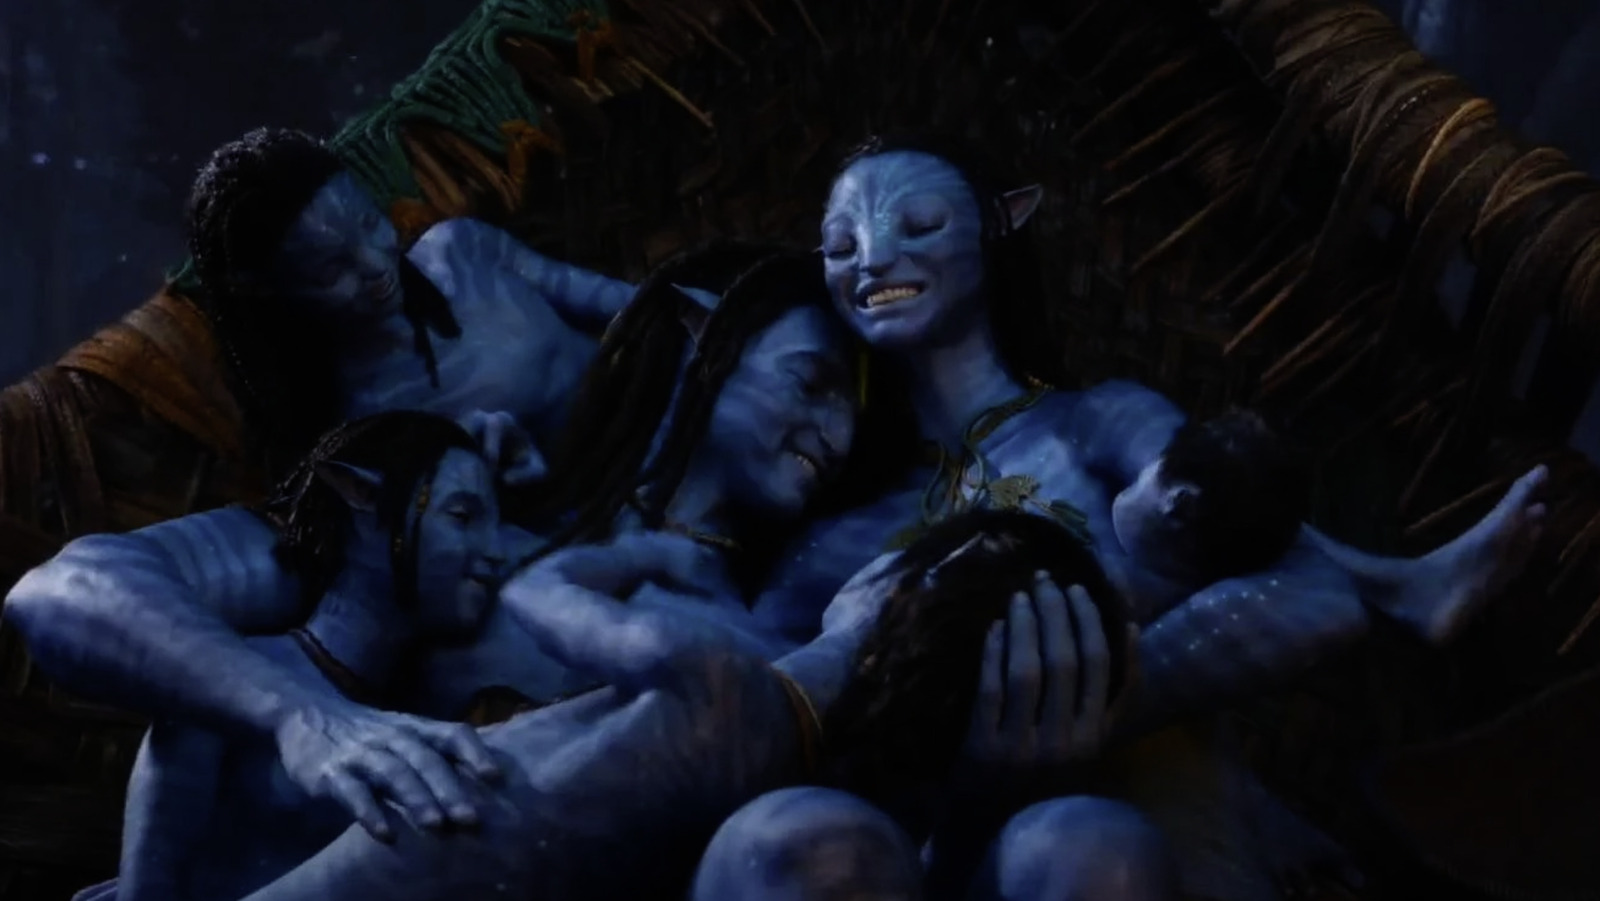 Becoming a mother changed the way Zoe Saldana approached Avatar: The Way of Water